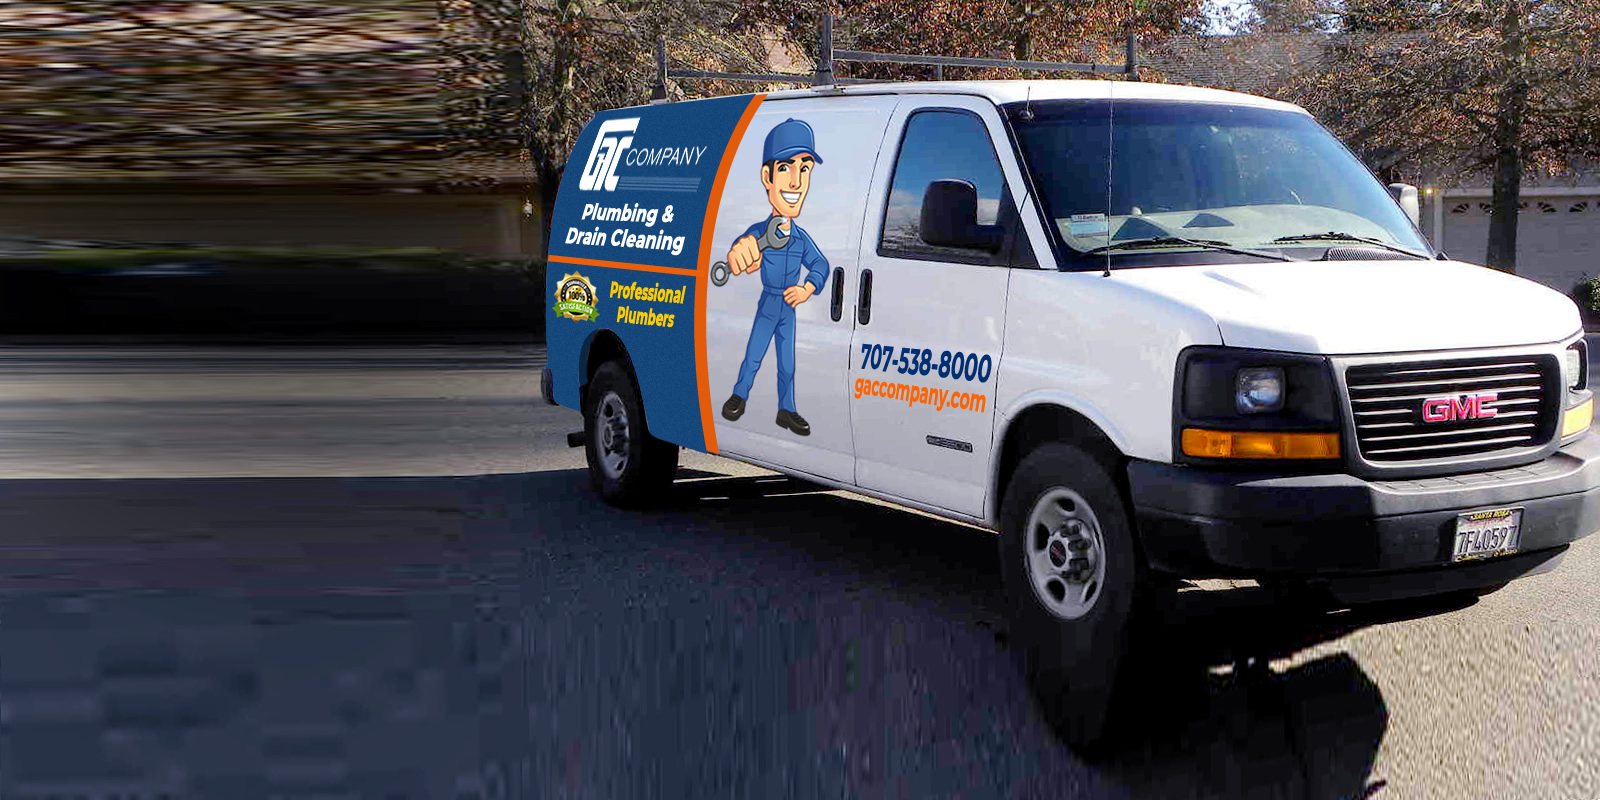 Best Plumbing & Drain Cleaning Services in Rohnert park